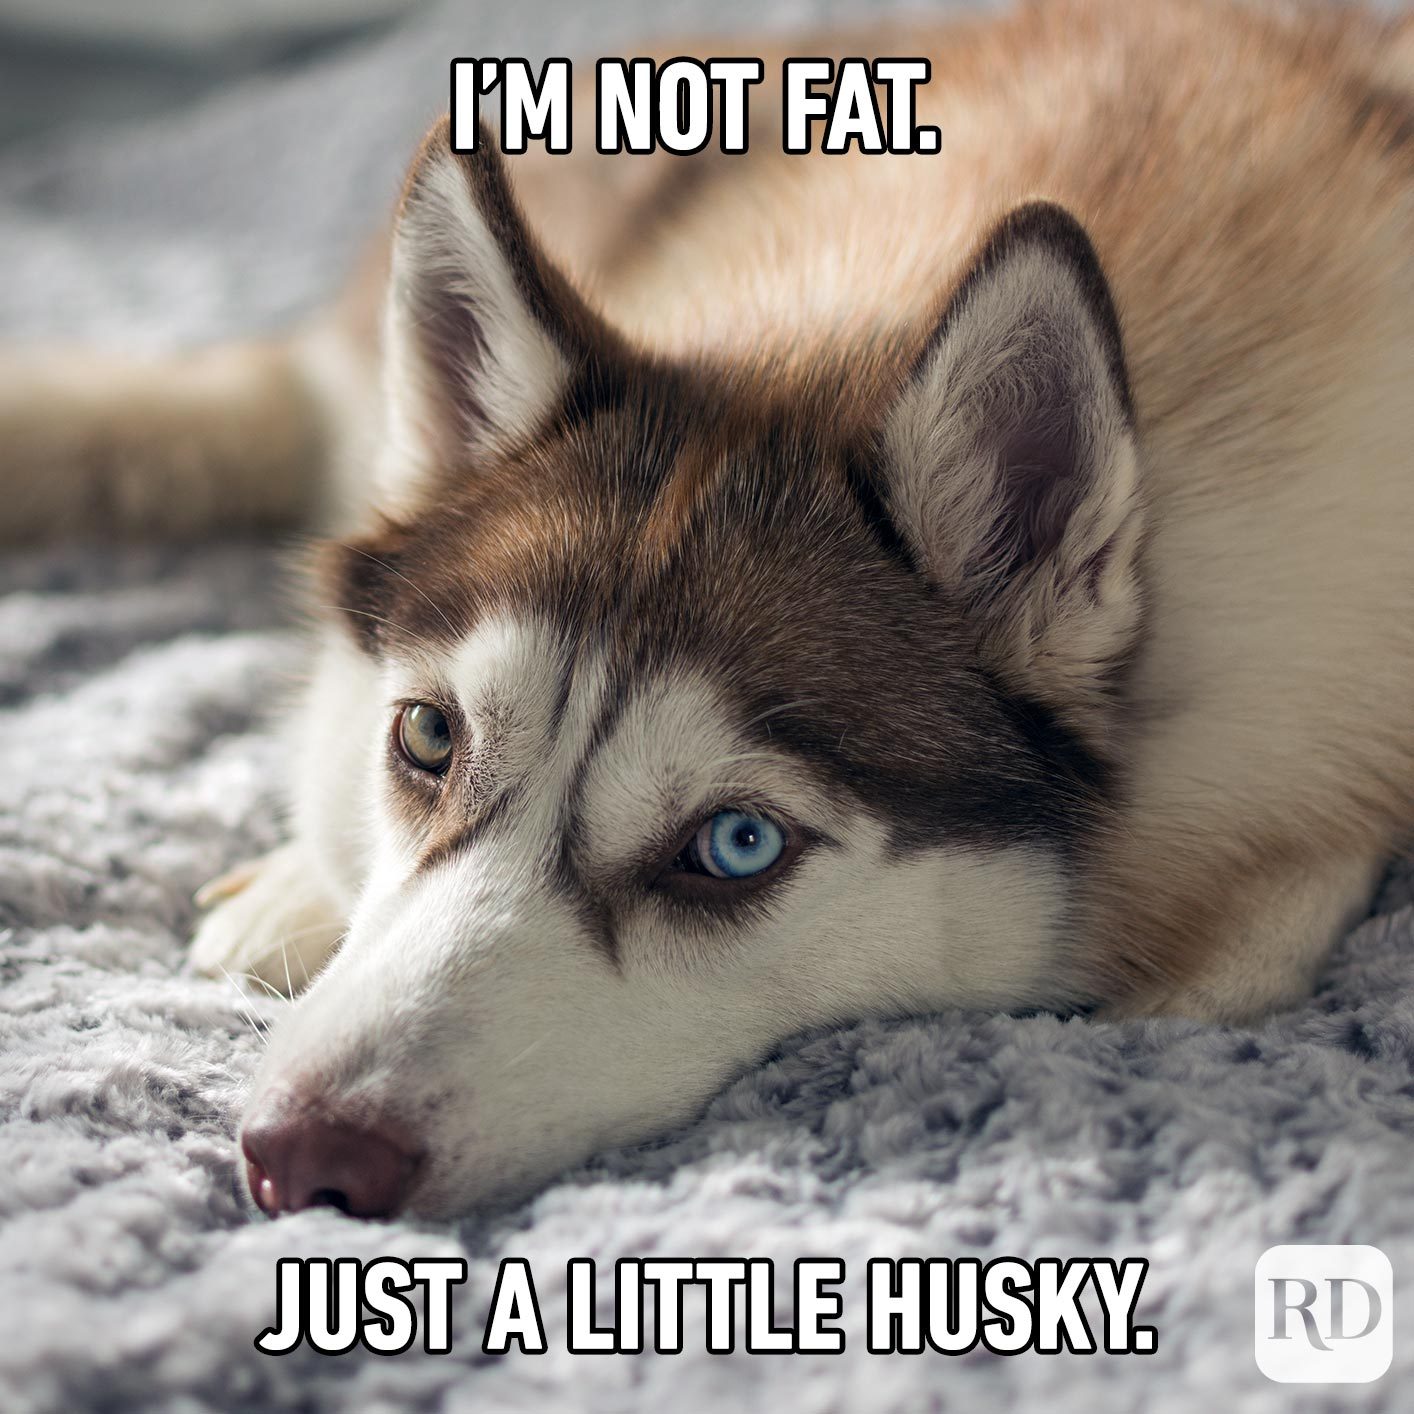 Husky looking at you. Meme text: I'm not fat. Just a little husky.